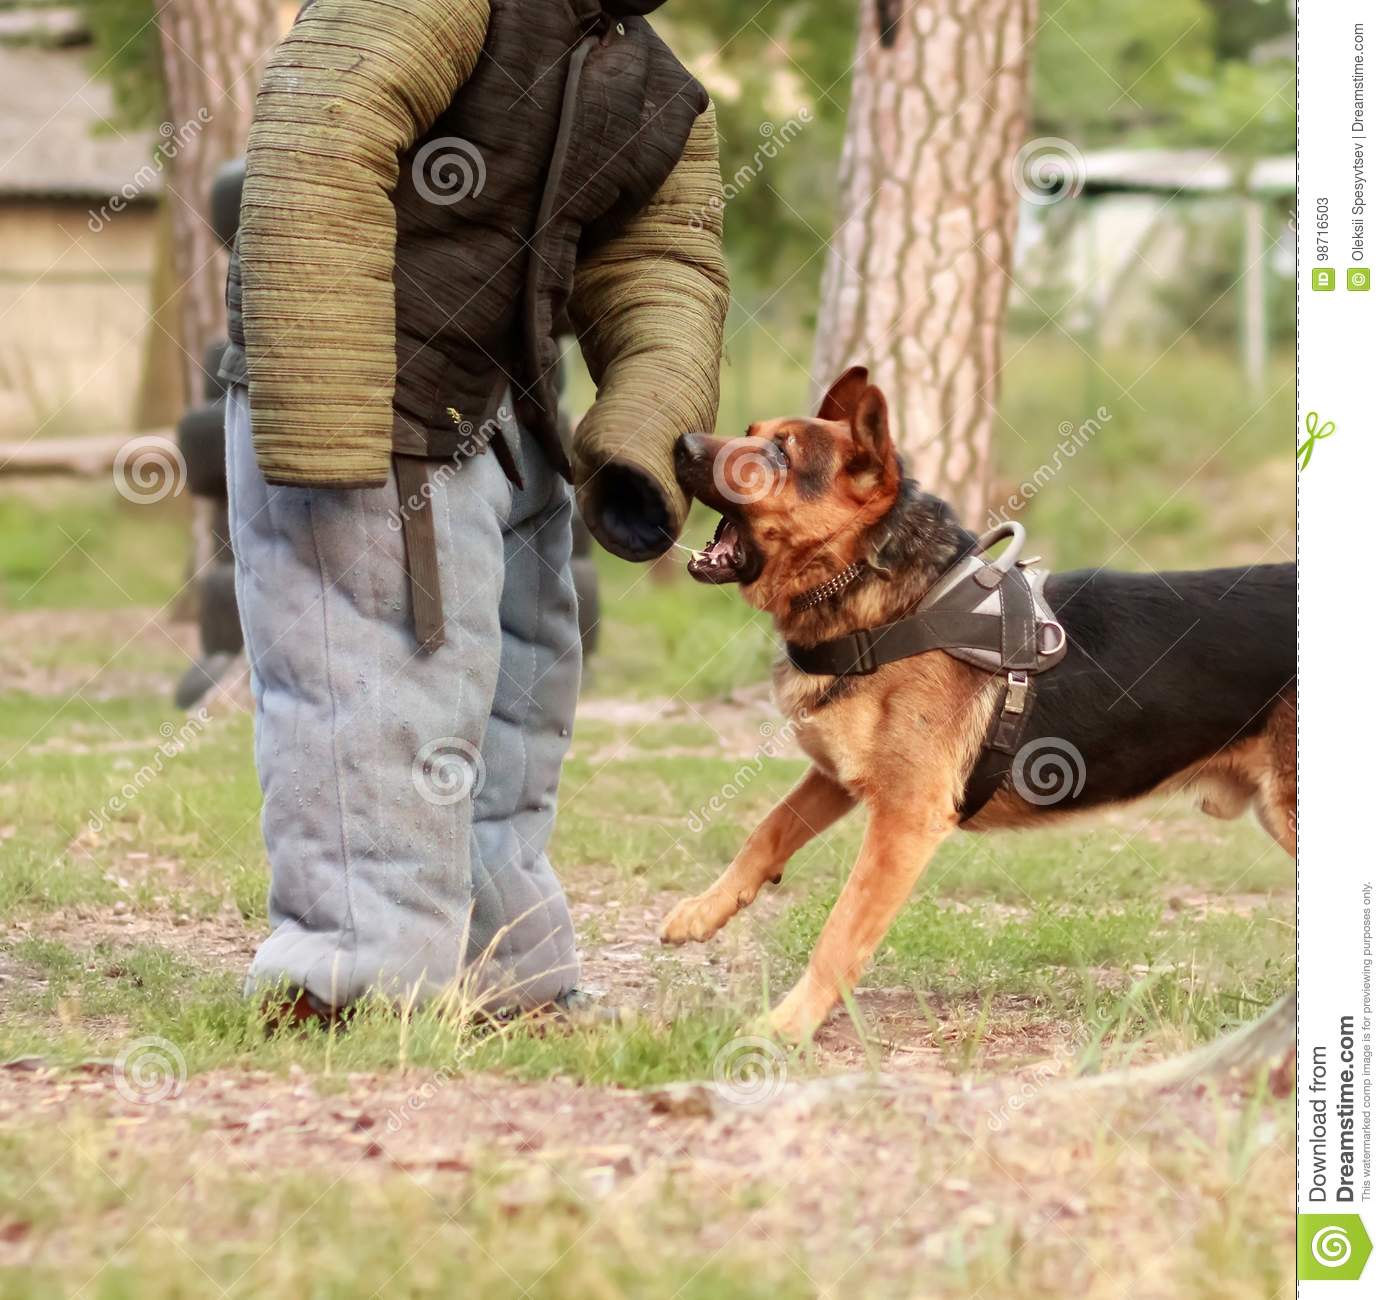 Dog Trainers In K9 Bite Suits In Action. Training Class On The ...